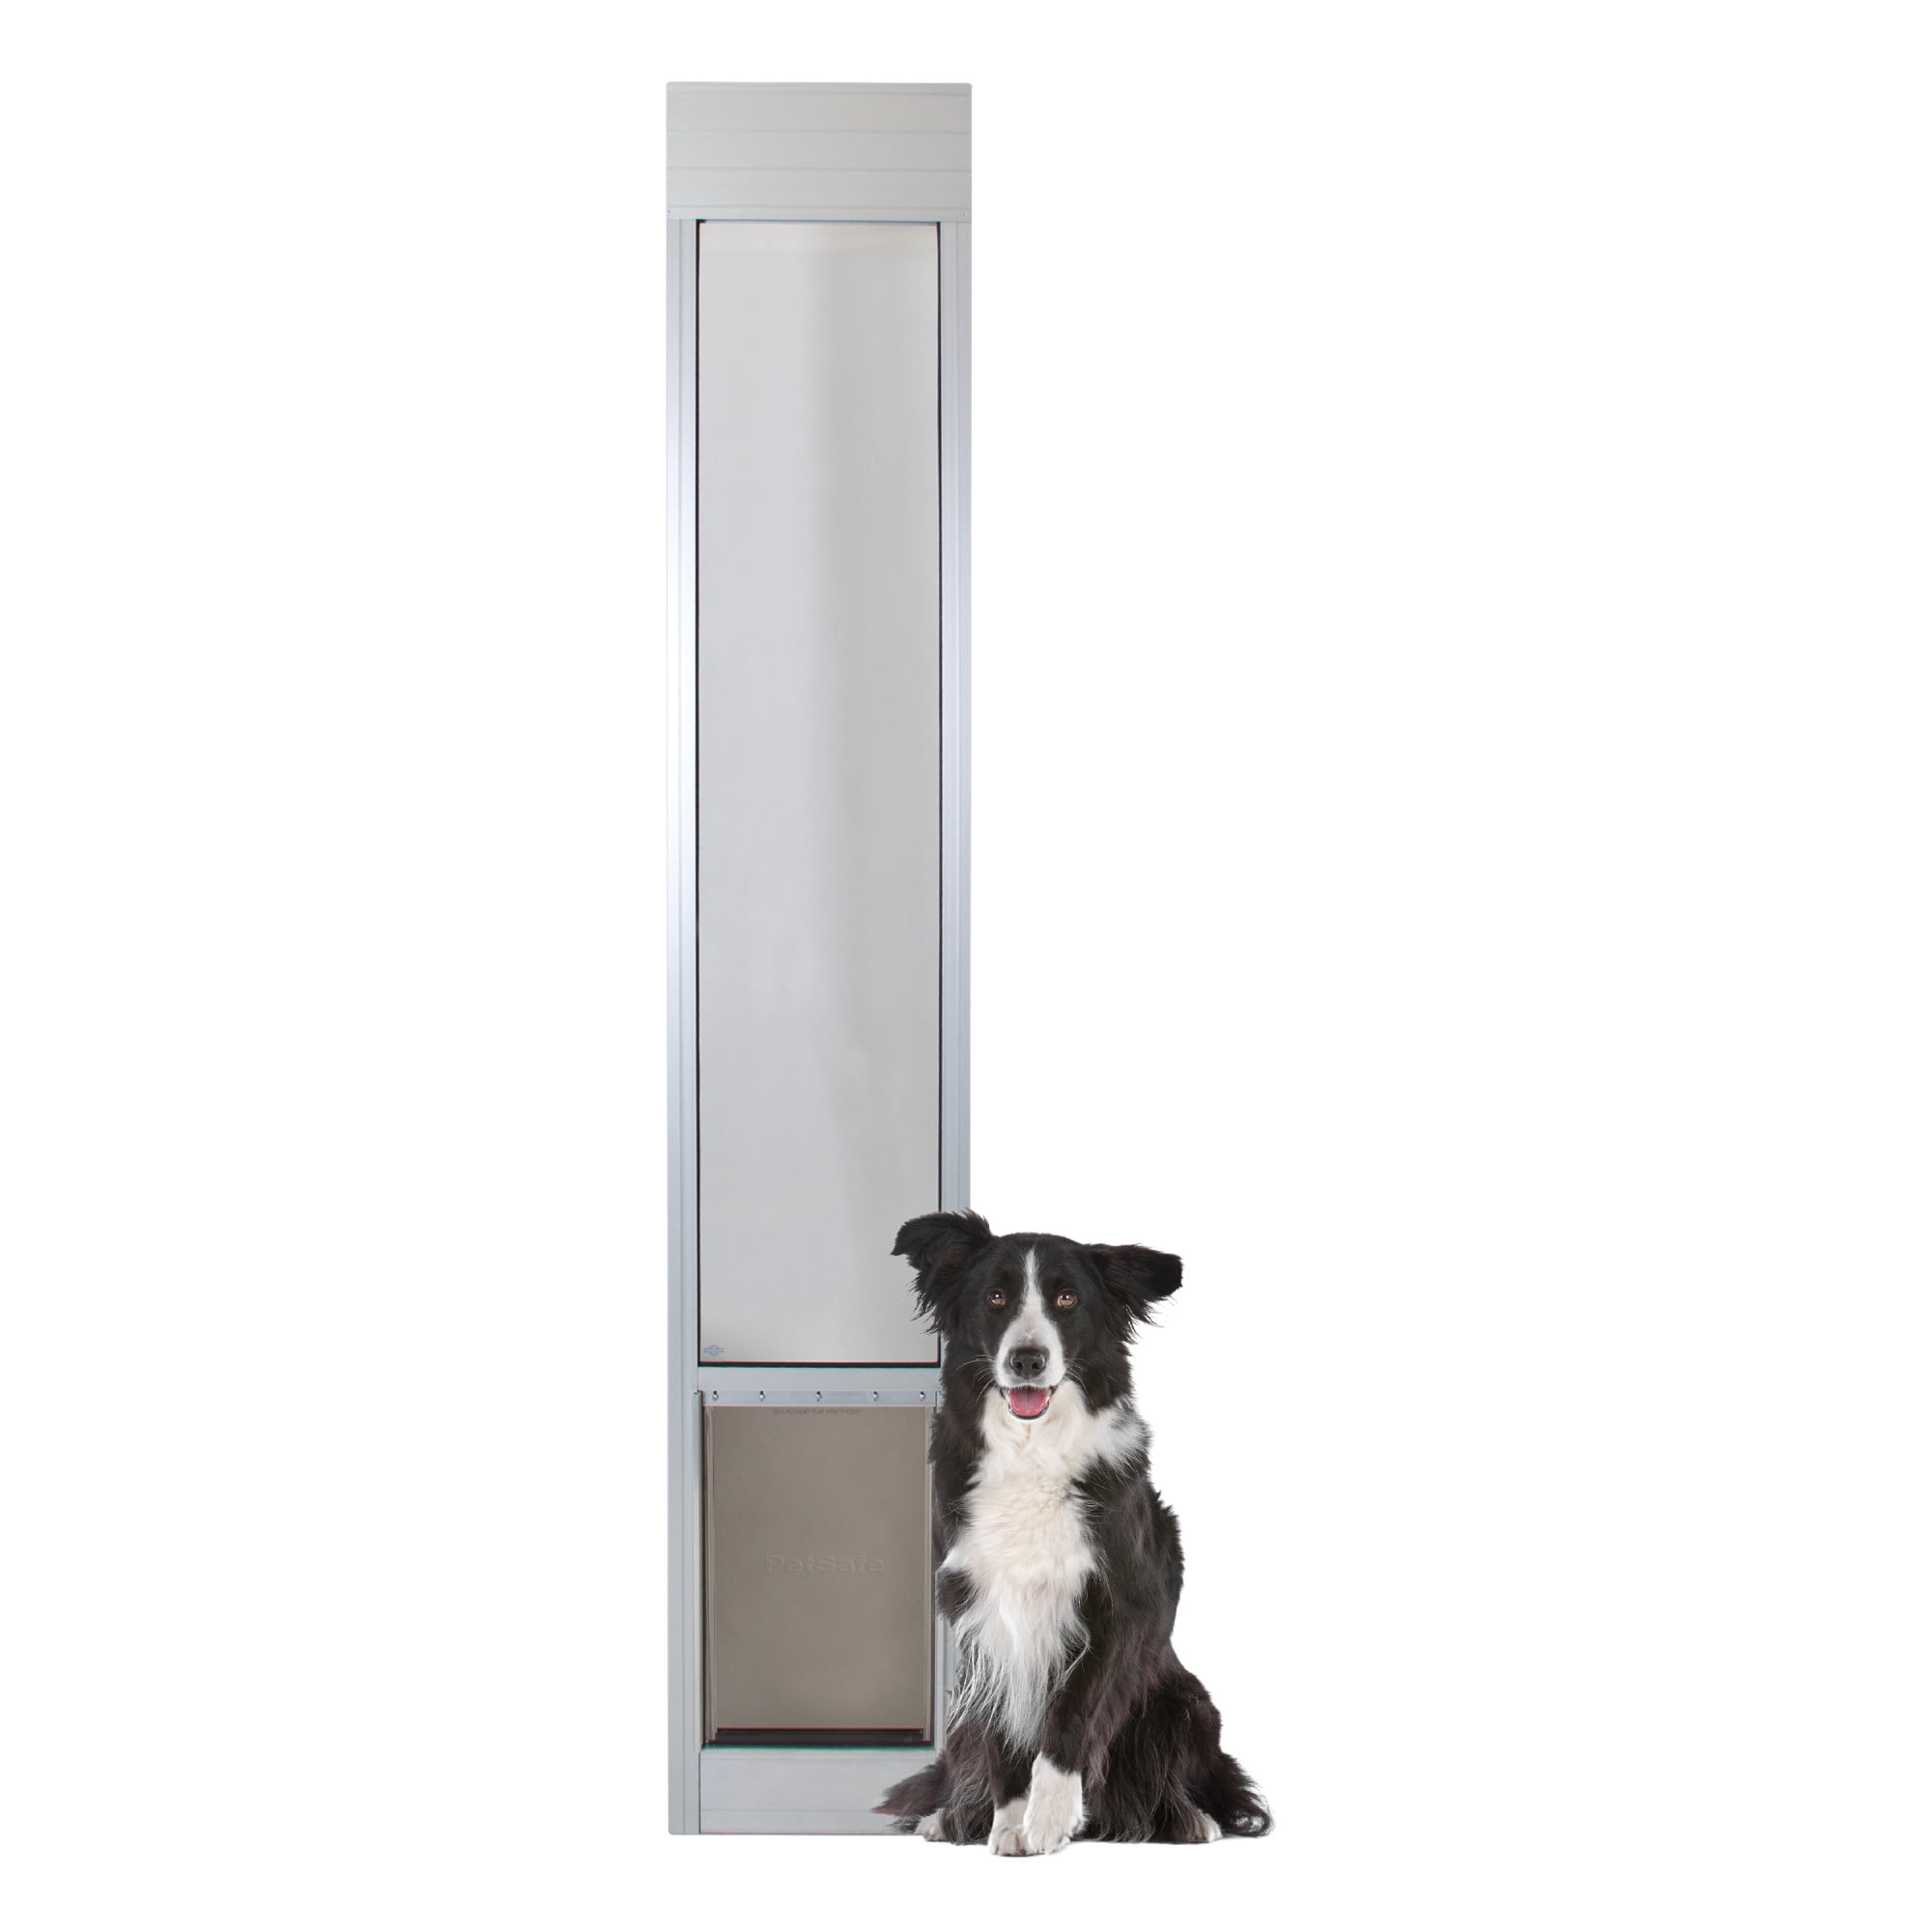 Small 76 13/16 to 81 PetSafe 2-Piece Sliding Glass Pet Door Great for Apartments or Rentals White